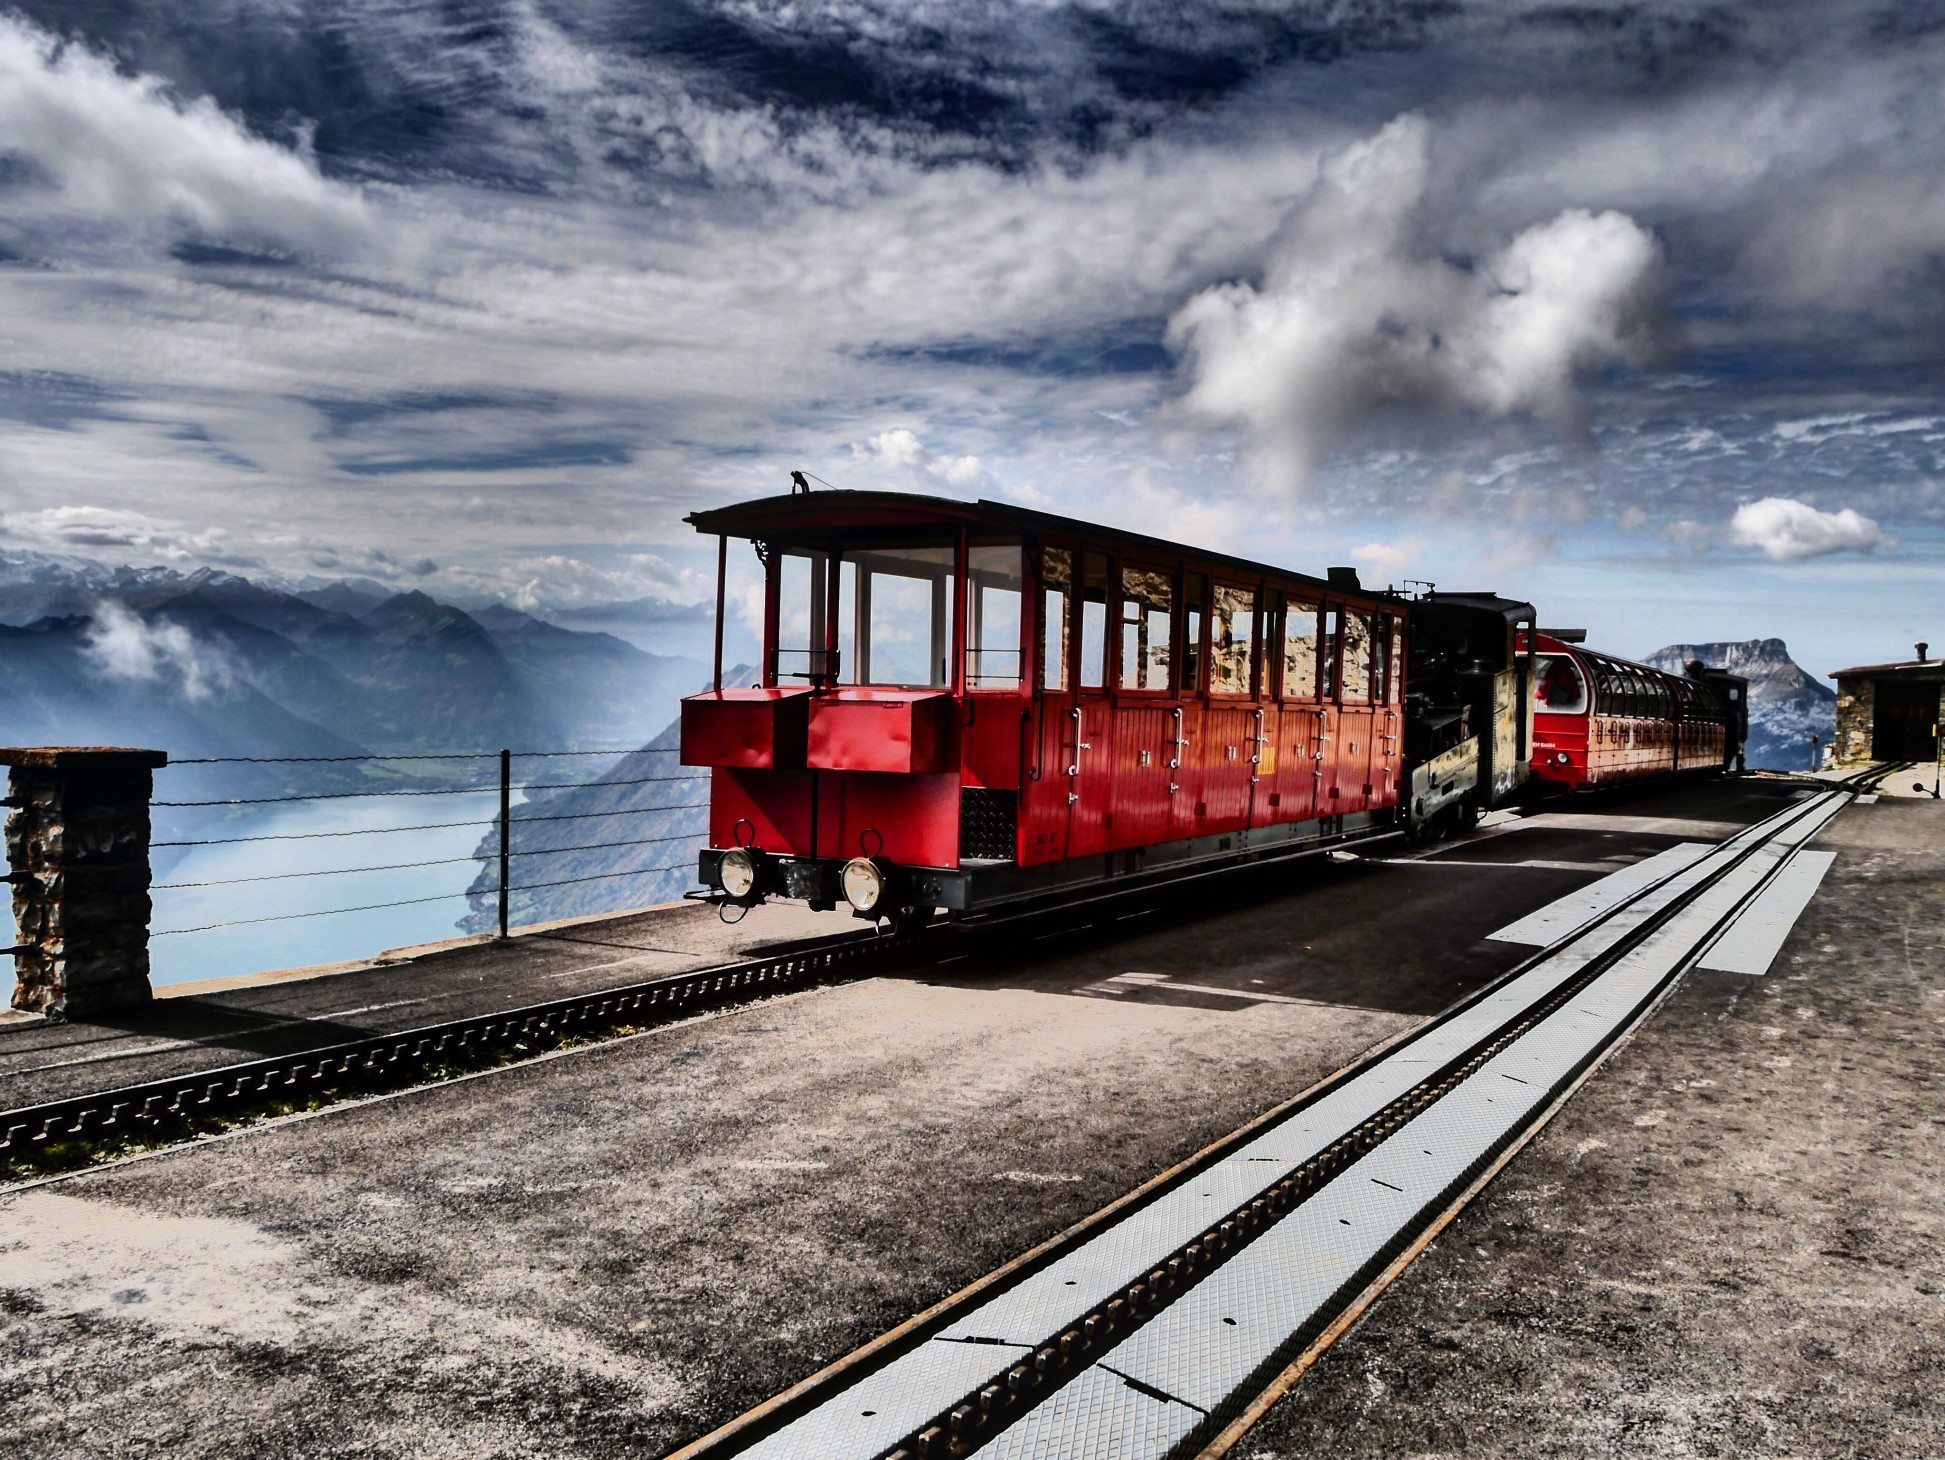 CONT.GALLERY rothorn end of railway 2244 m high brienz be switzerland t20 a76a2x